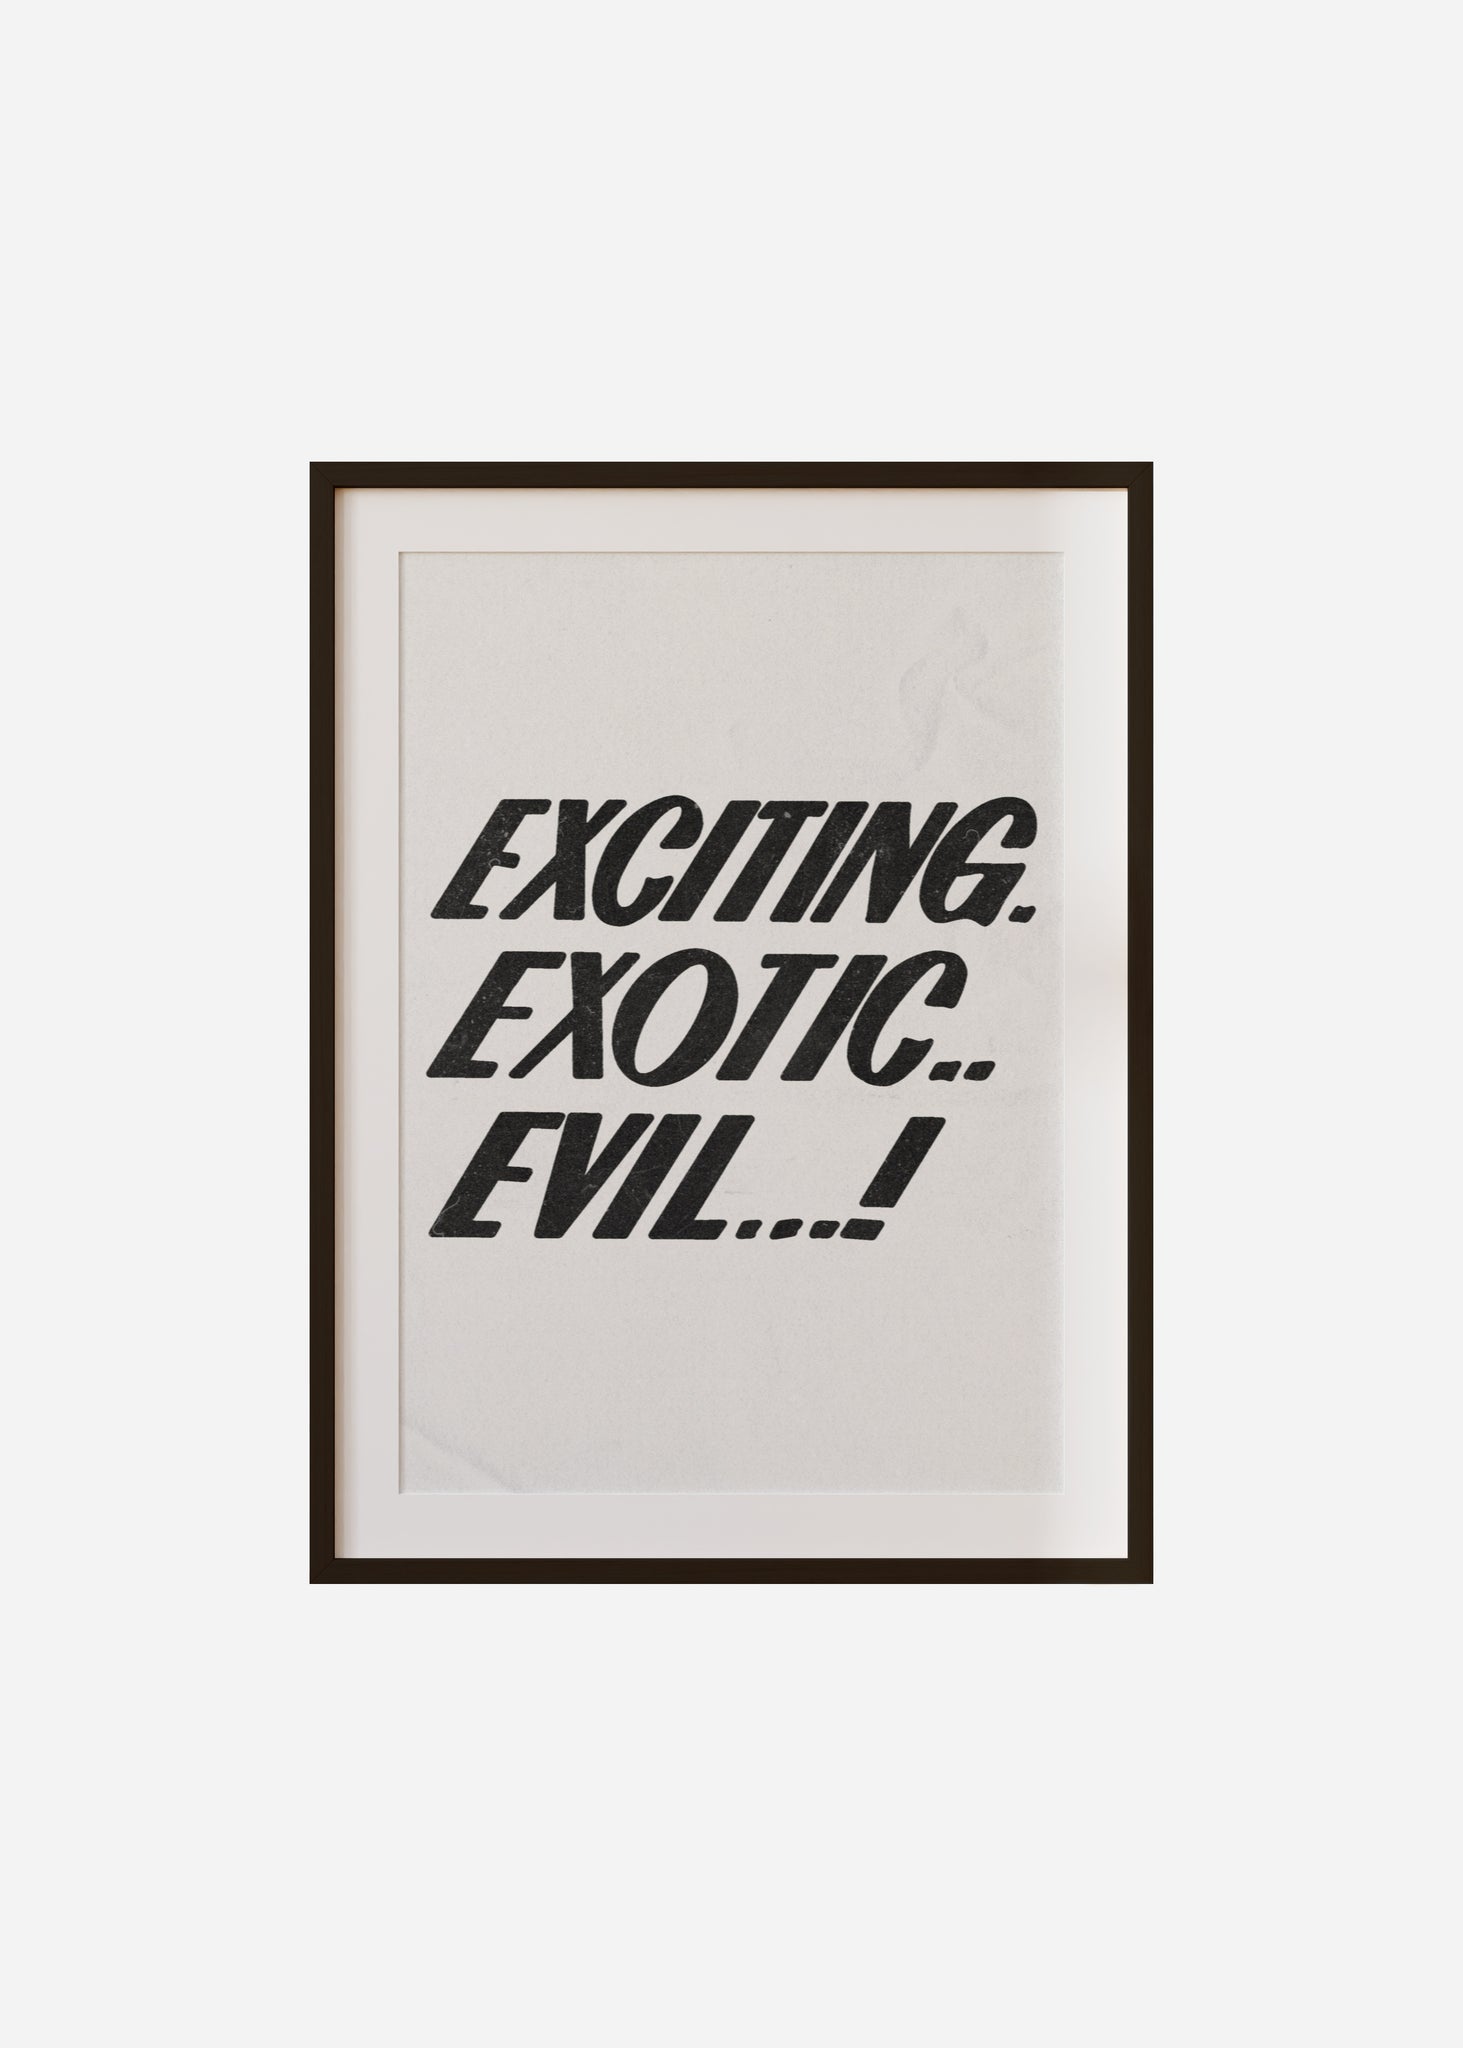 Exciting exotic evil! Framed & Mounted Print